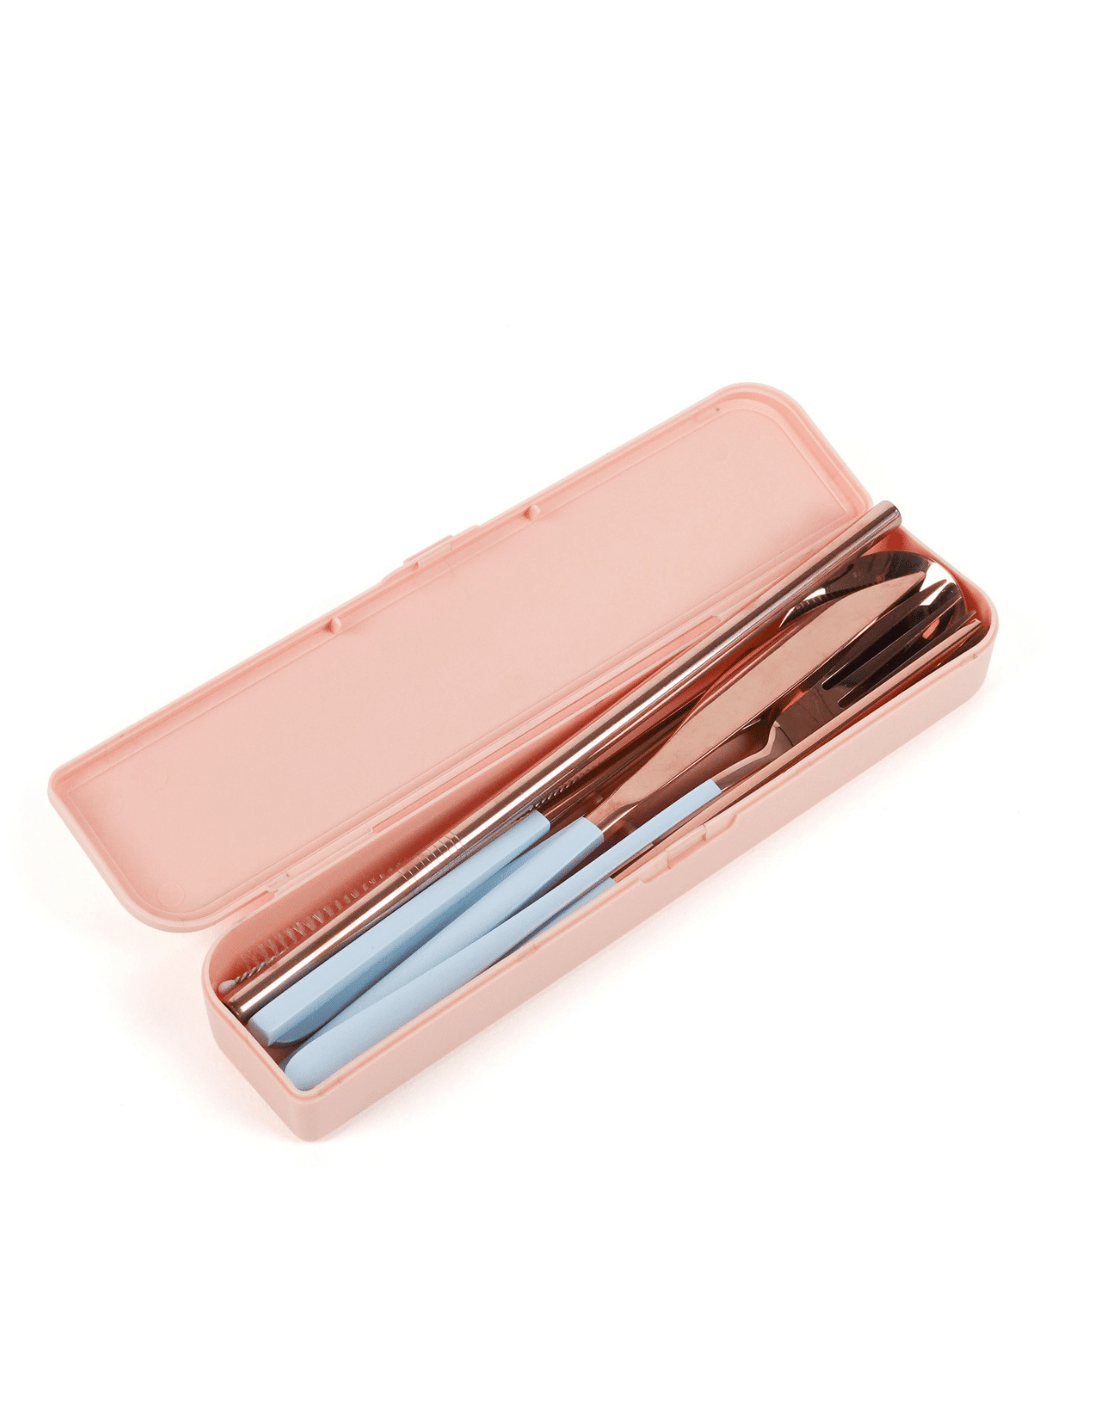 Cutlery Kit - Rose Gold with Powder Blue Handle (PRE-ORDER)